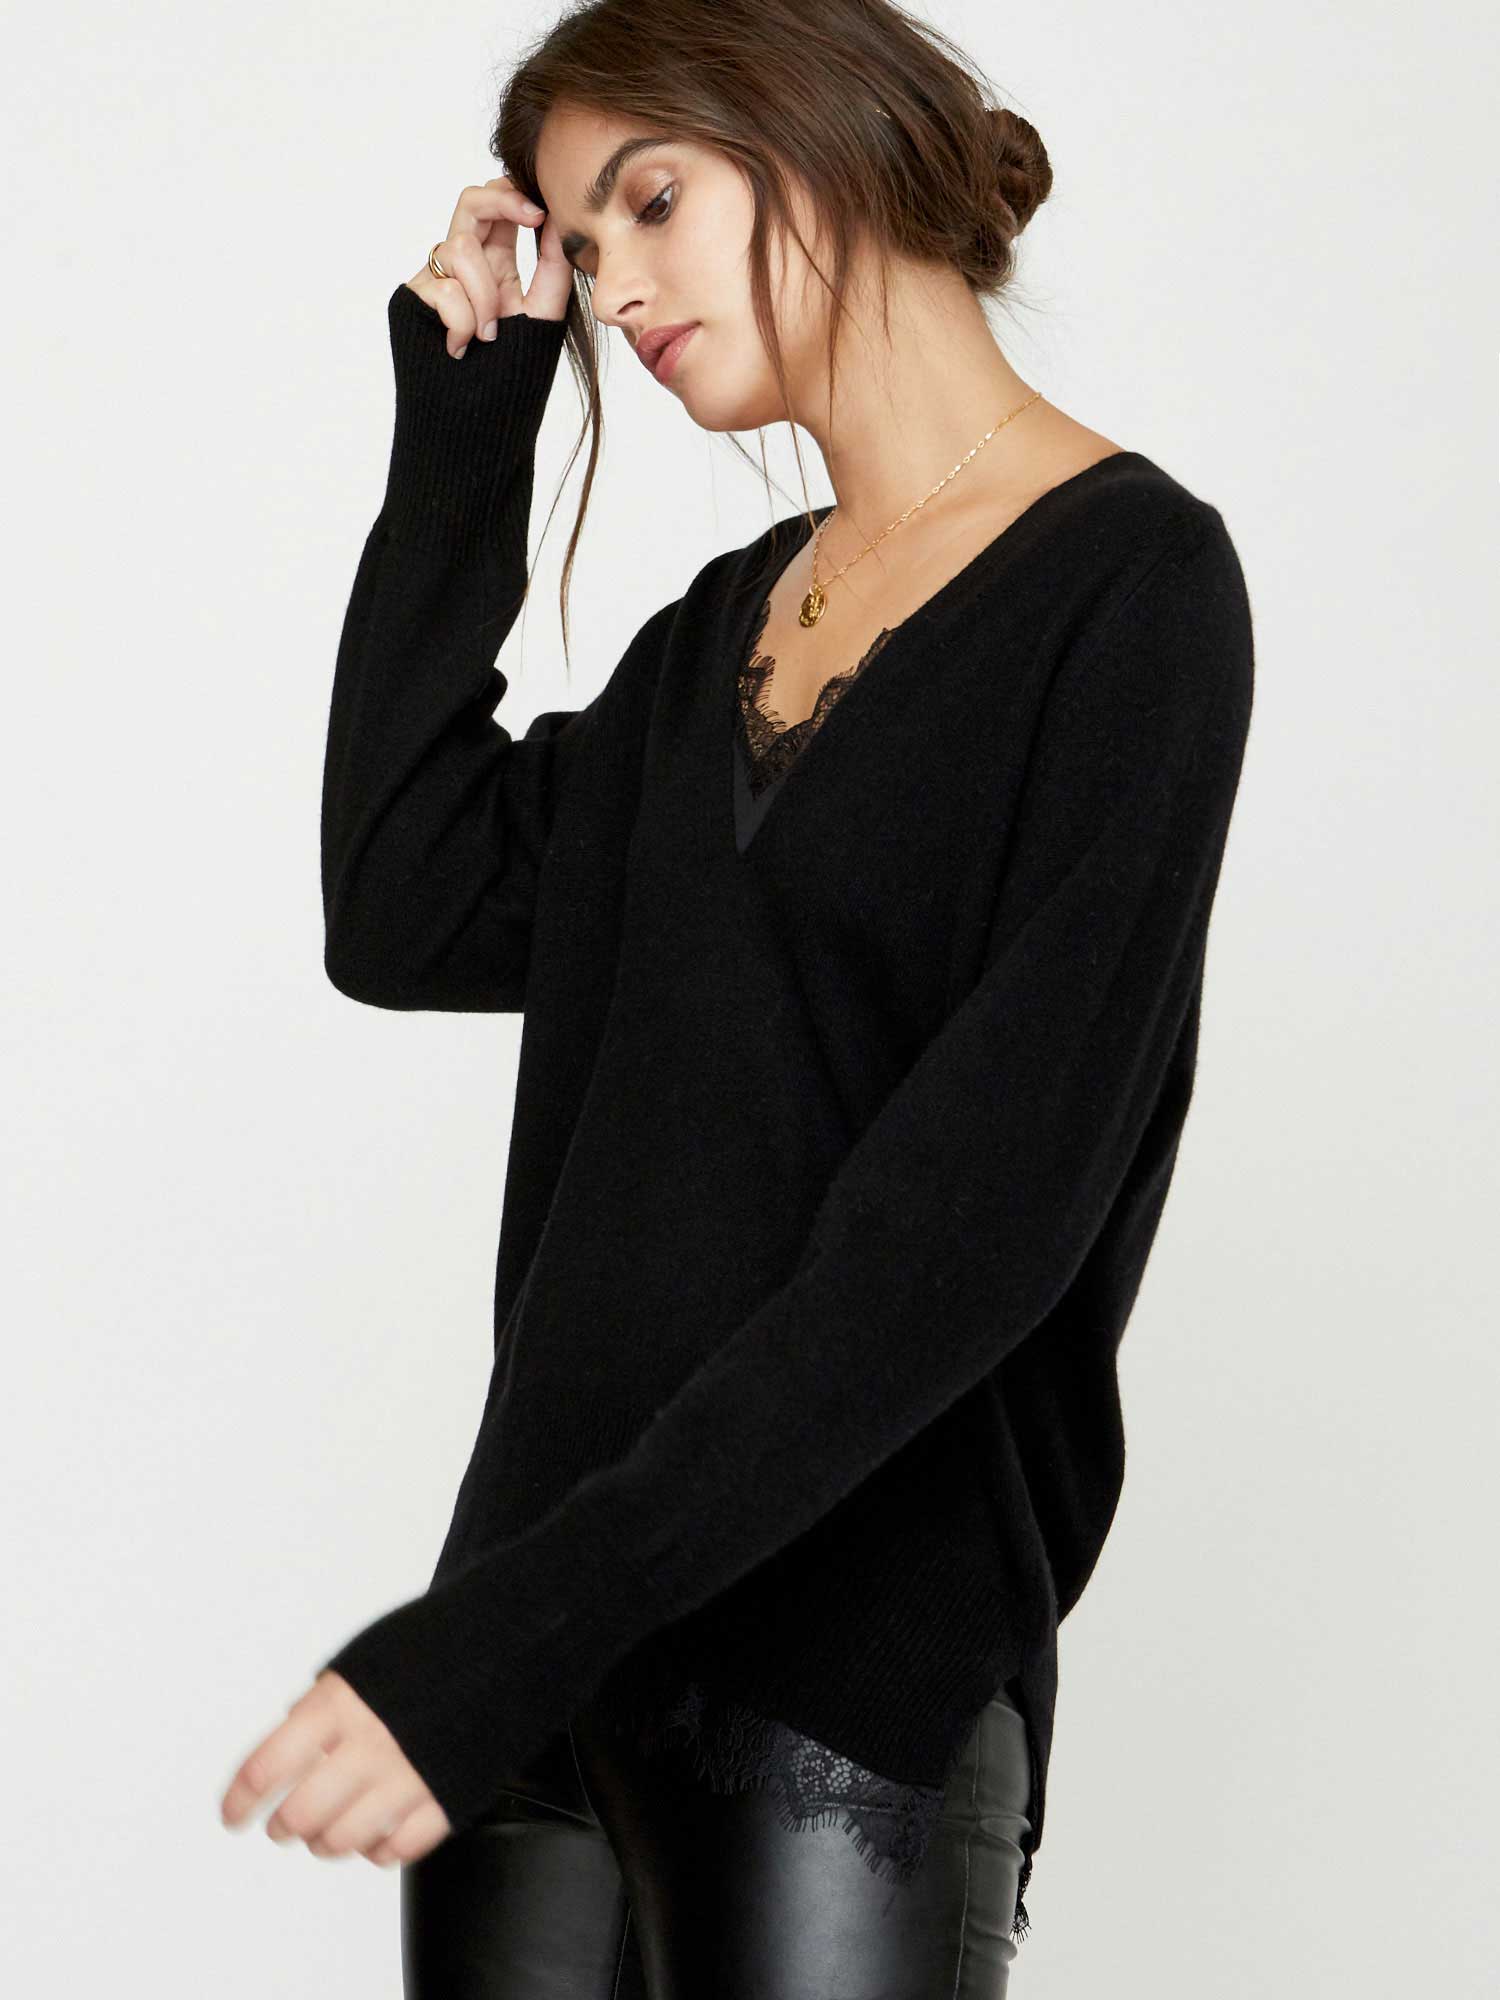 Lucky Brand Cloud Soft V-Neck Sweater (Black) Women's Clothing - ShopStyle